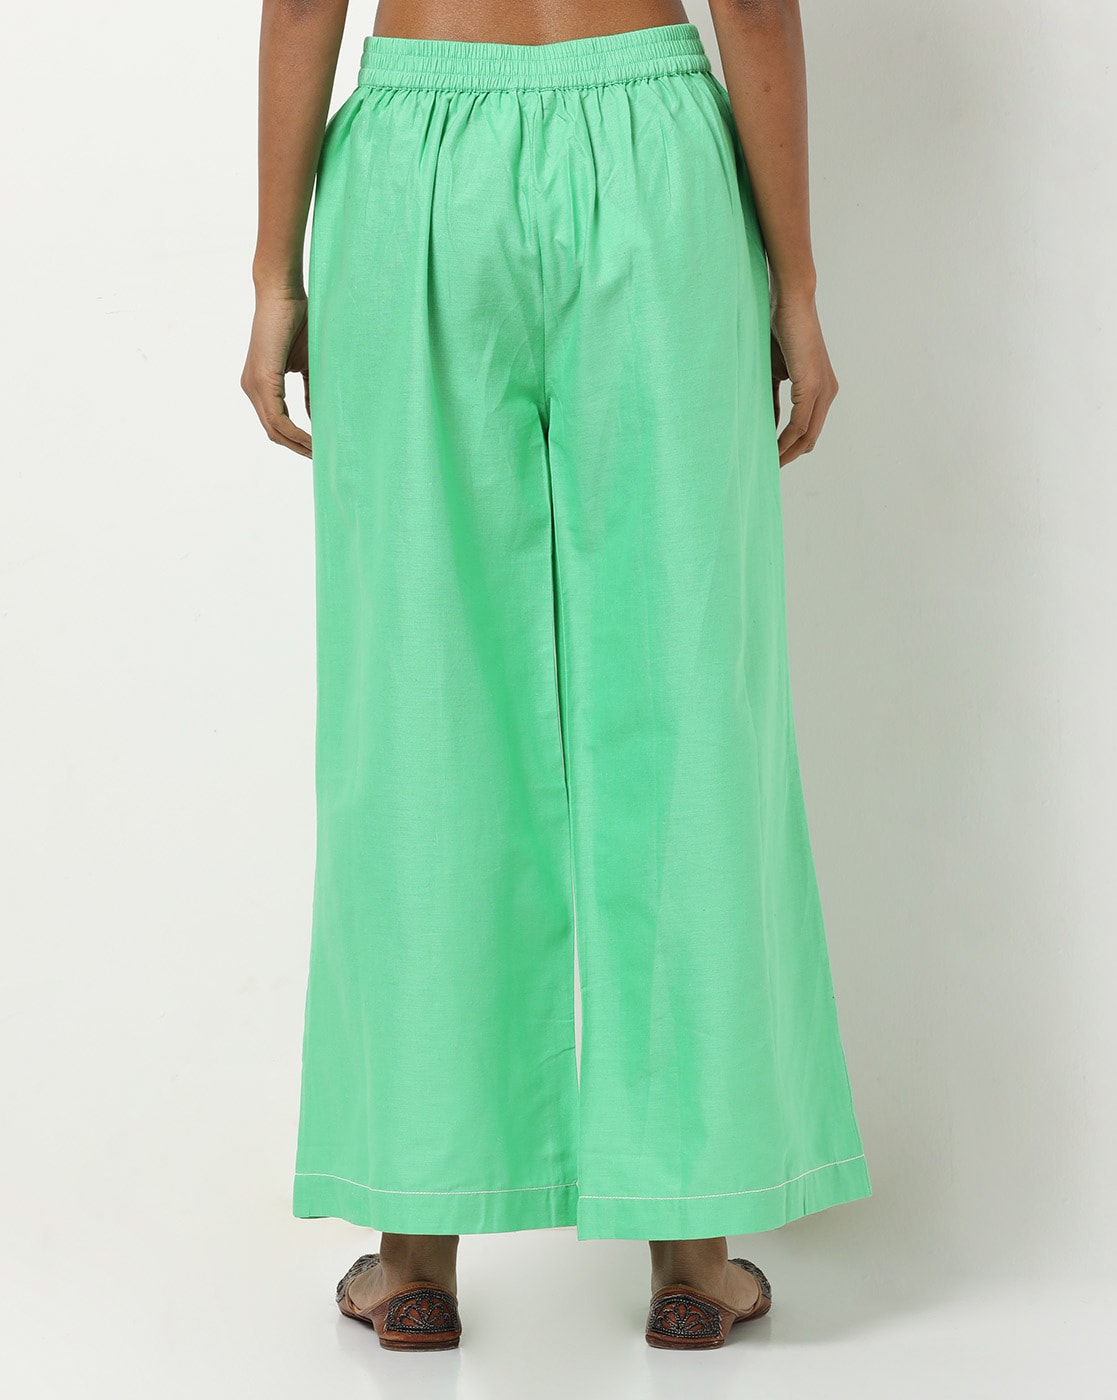 Happiness İstanbul Green Pants Styles, Prices - Trendyol - Page 2